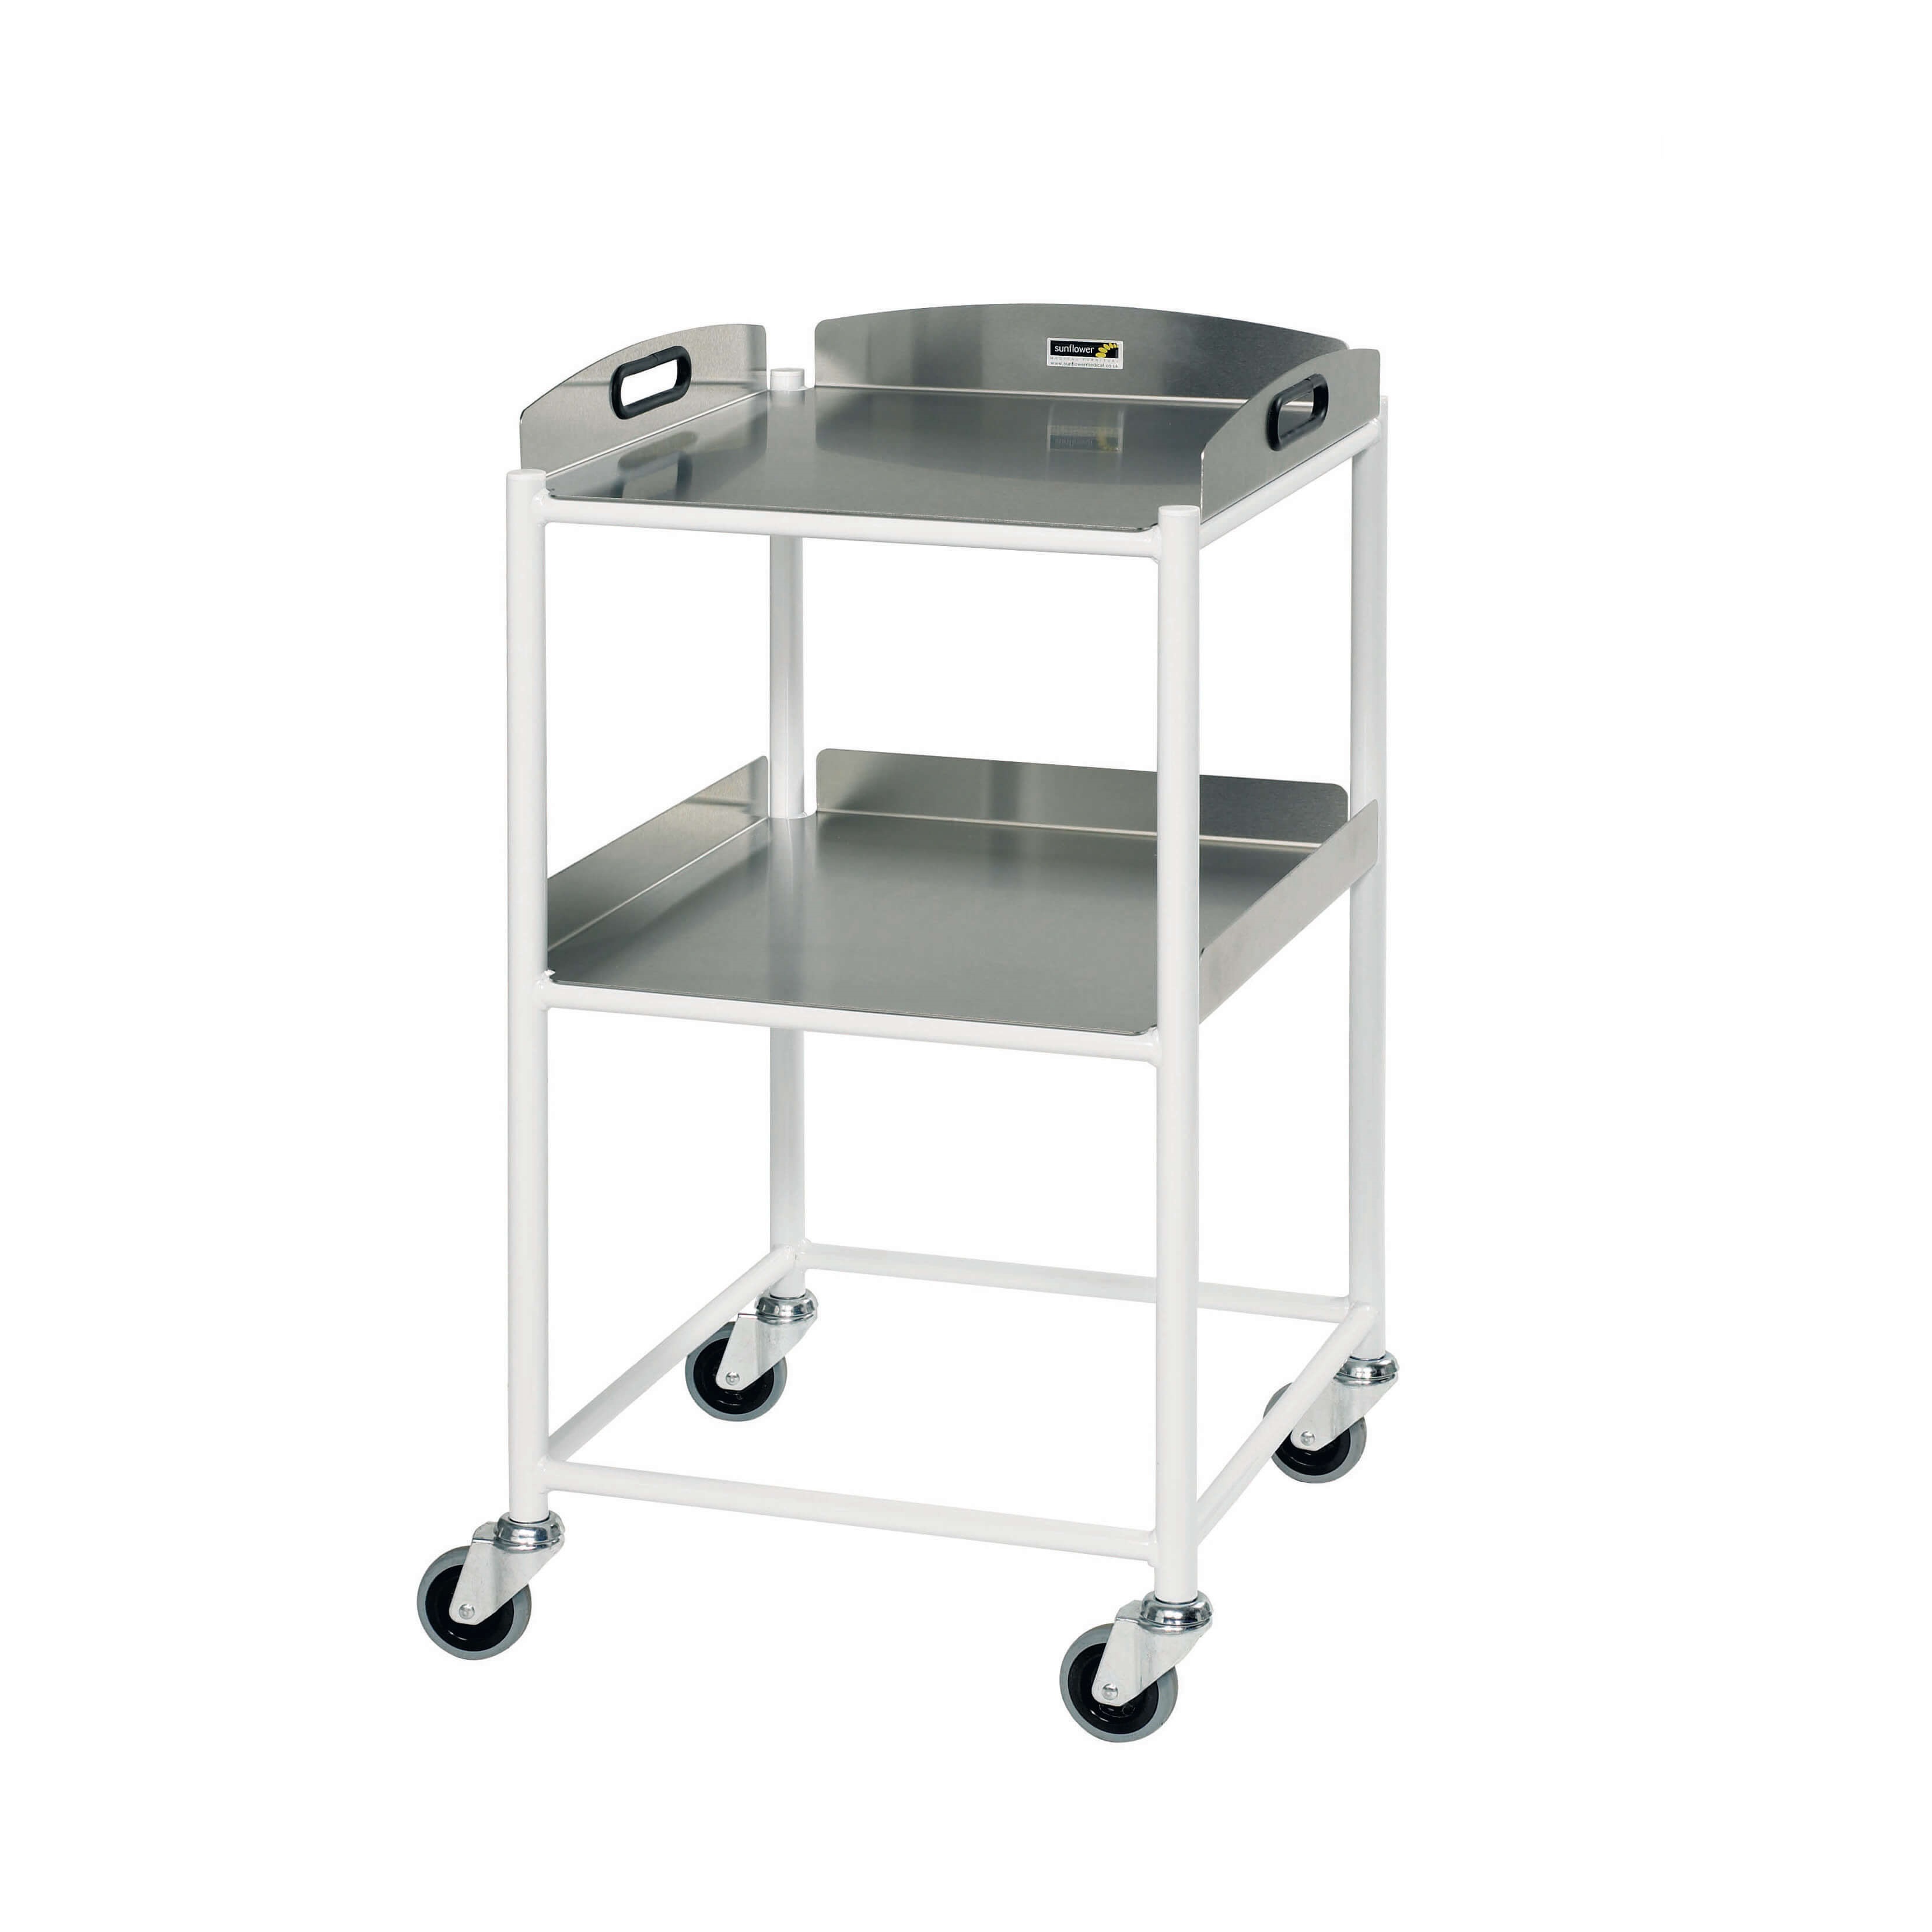 Dressing Trolley, 2 Stainless Steel Trays [Sun-DT4S2]